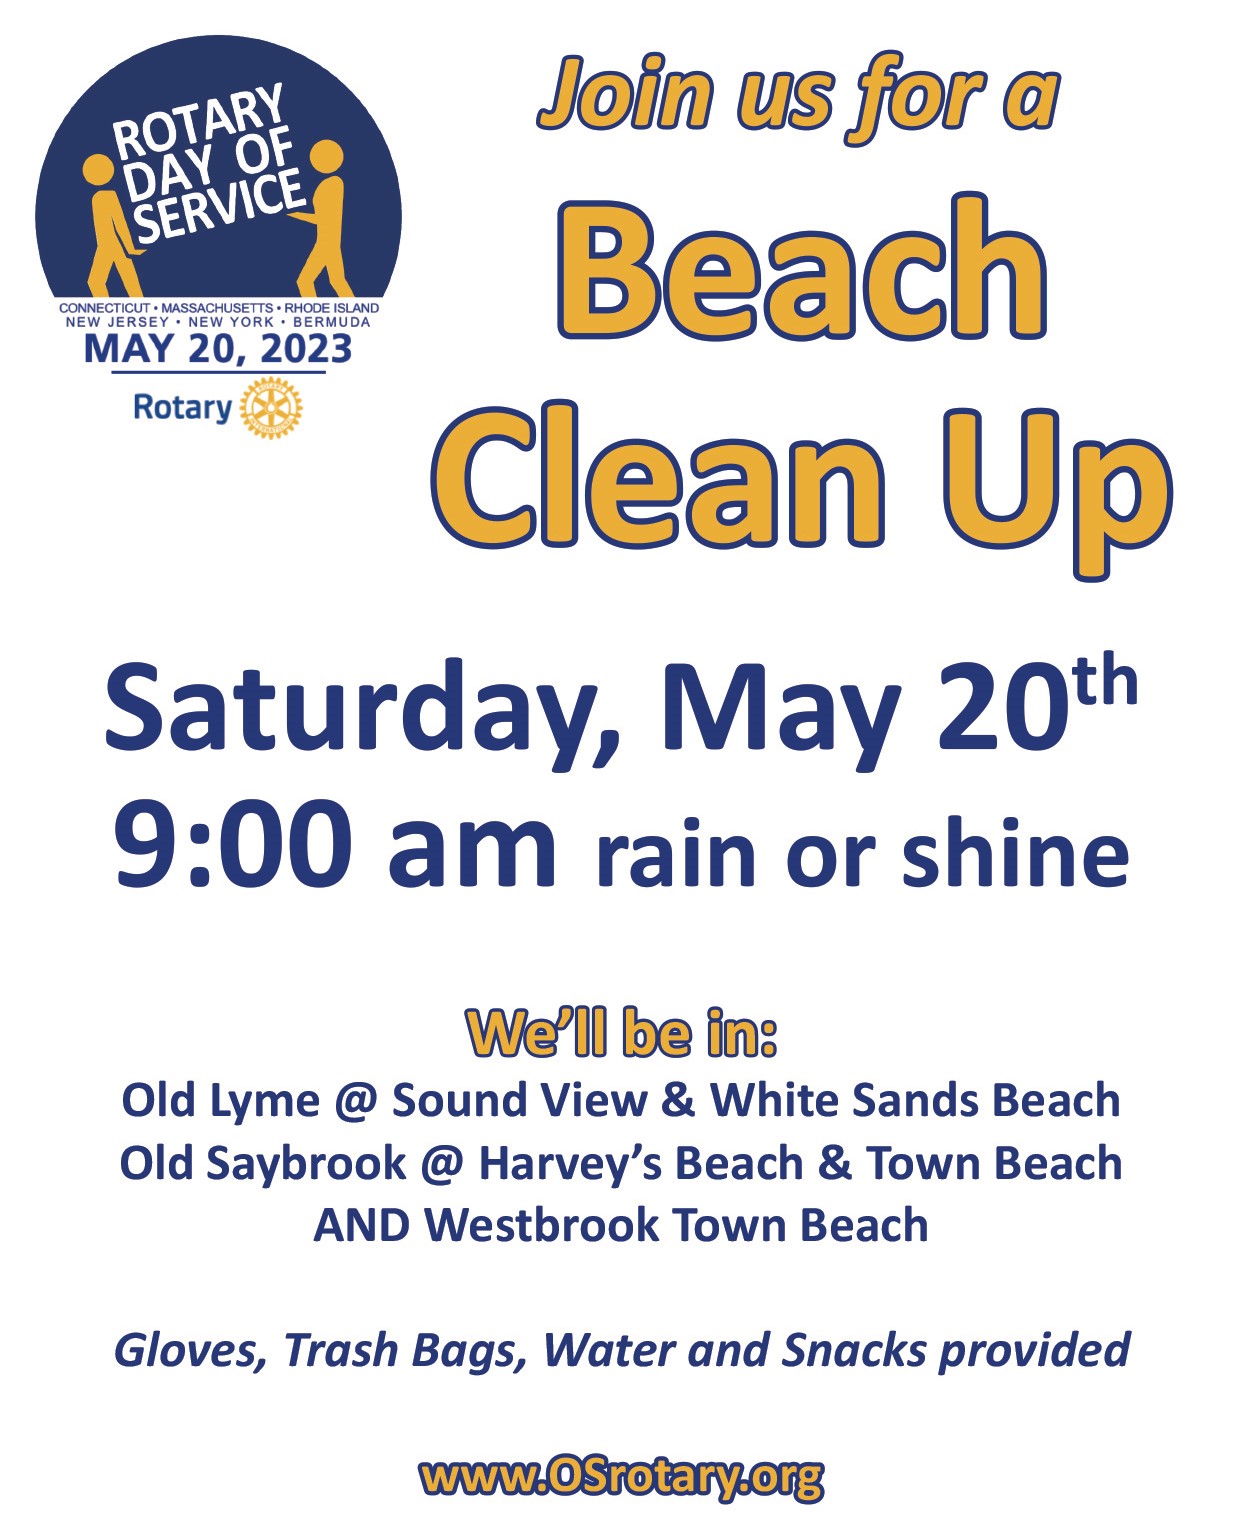 Rotary Day of Service - Cleaning the Beaches